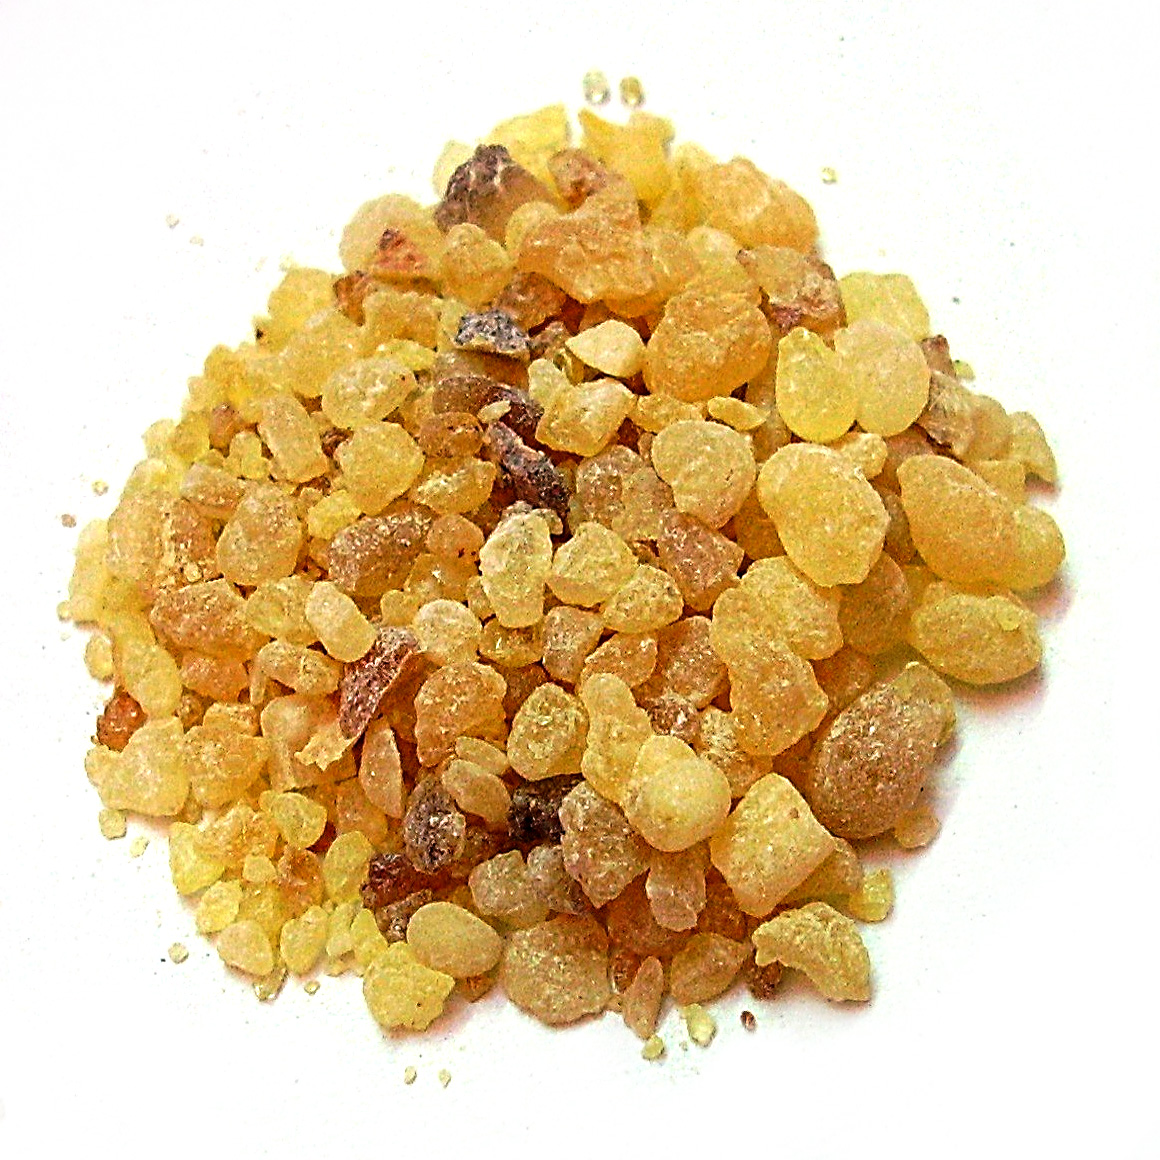 Frankincense is resin from the Boswellia plant.